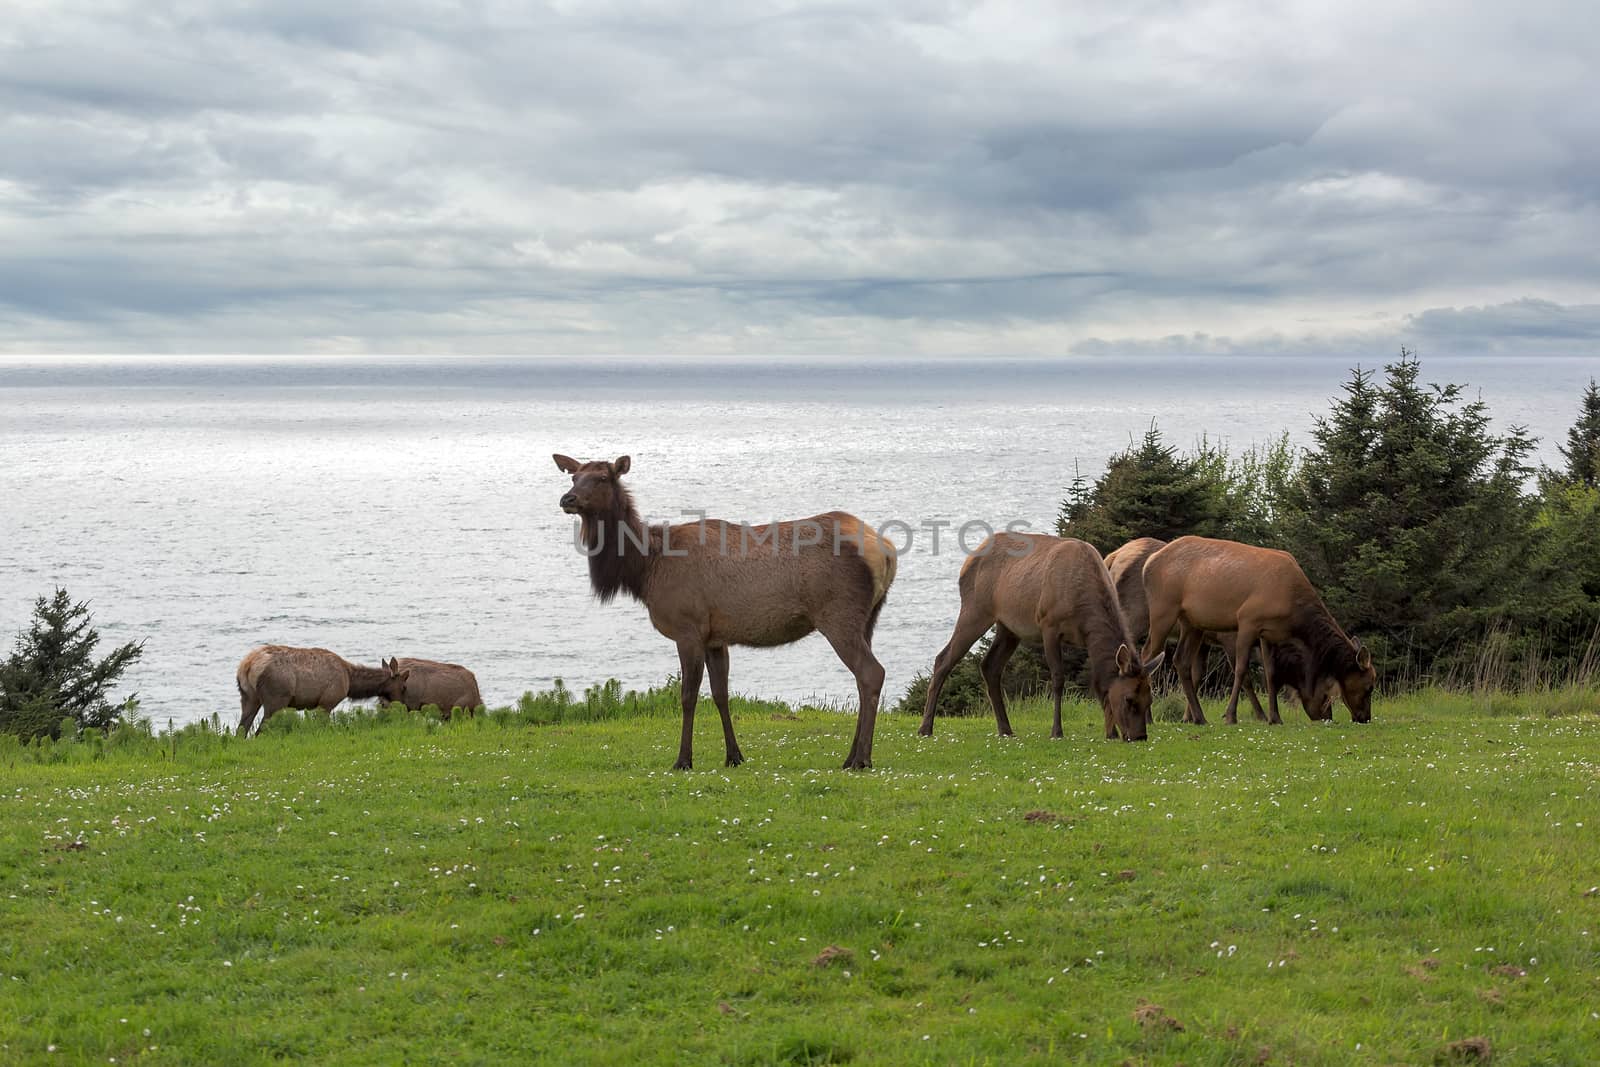 Herd of Elk grazing on green pasture in Cannon Beach Ecola State Park at Oregon Coast